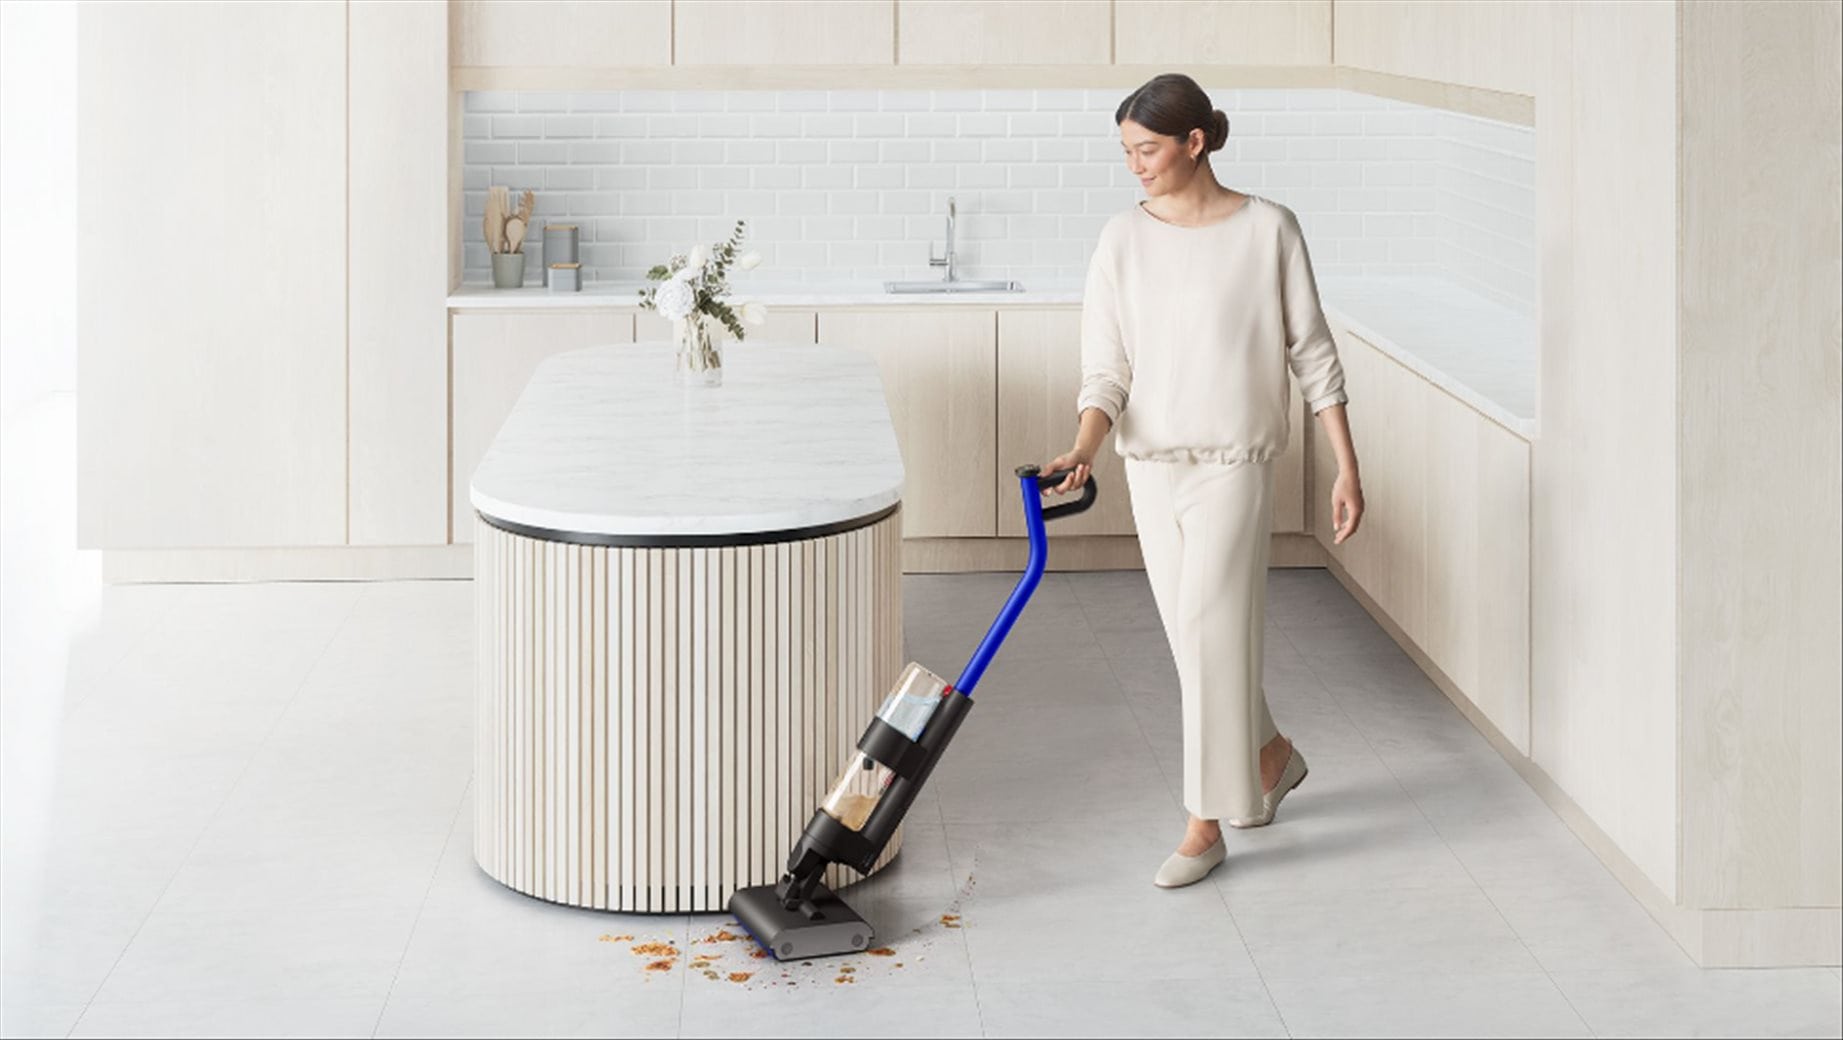 Dyson Introduces a New Innovation: Dyson WashG1, Which Redefines Wet Floor Cleaning